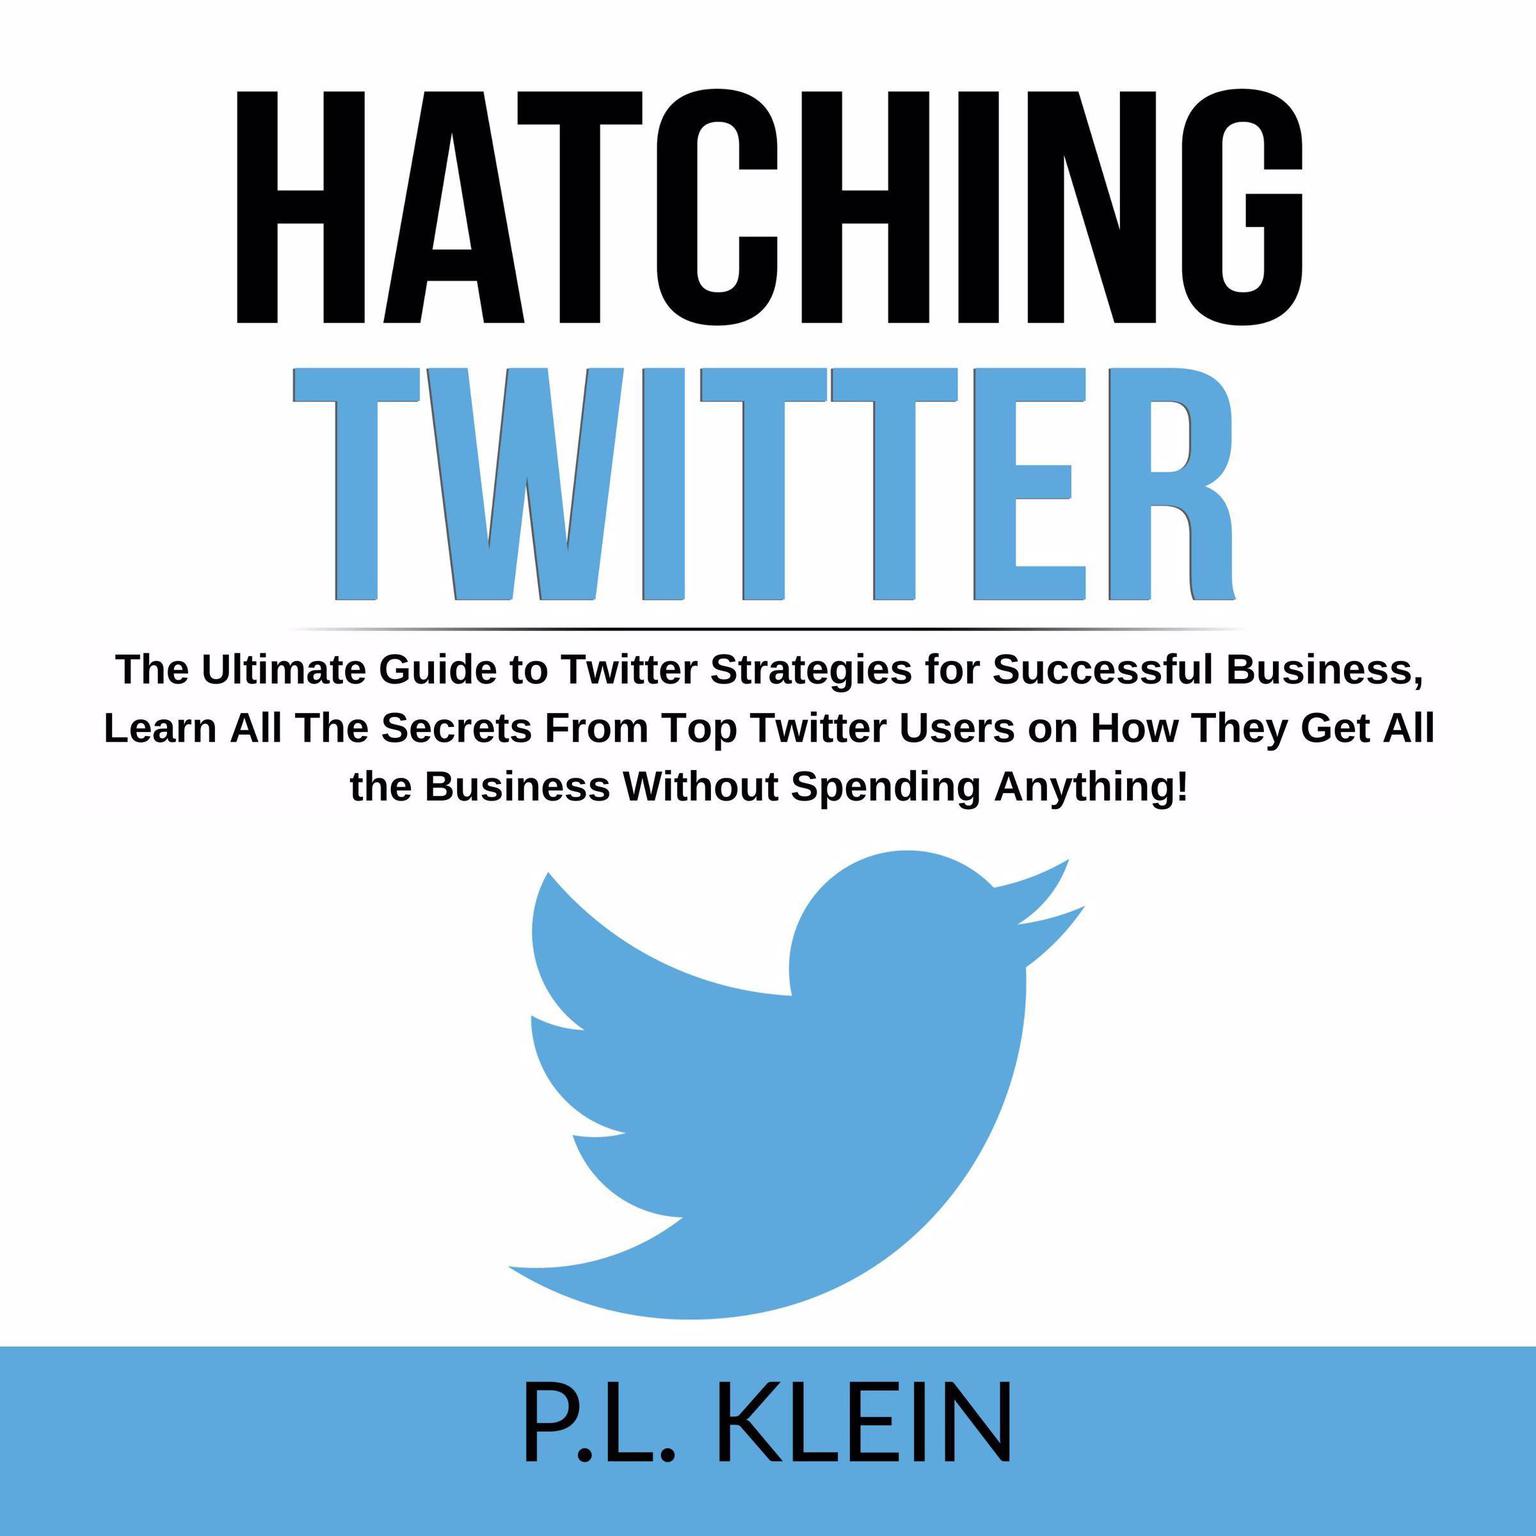 Hatching Twitter: The Ultimate Guide to Twitter Strategies for Successful Business, Learn All The Secrets From Top Twitter Users on How They Get All the Business Without Spending Anything! Audiobook, by P.L. Klein